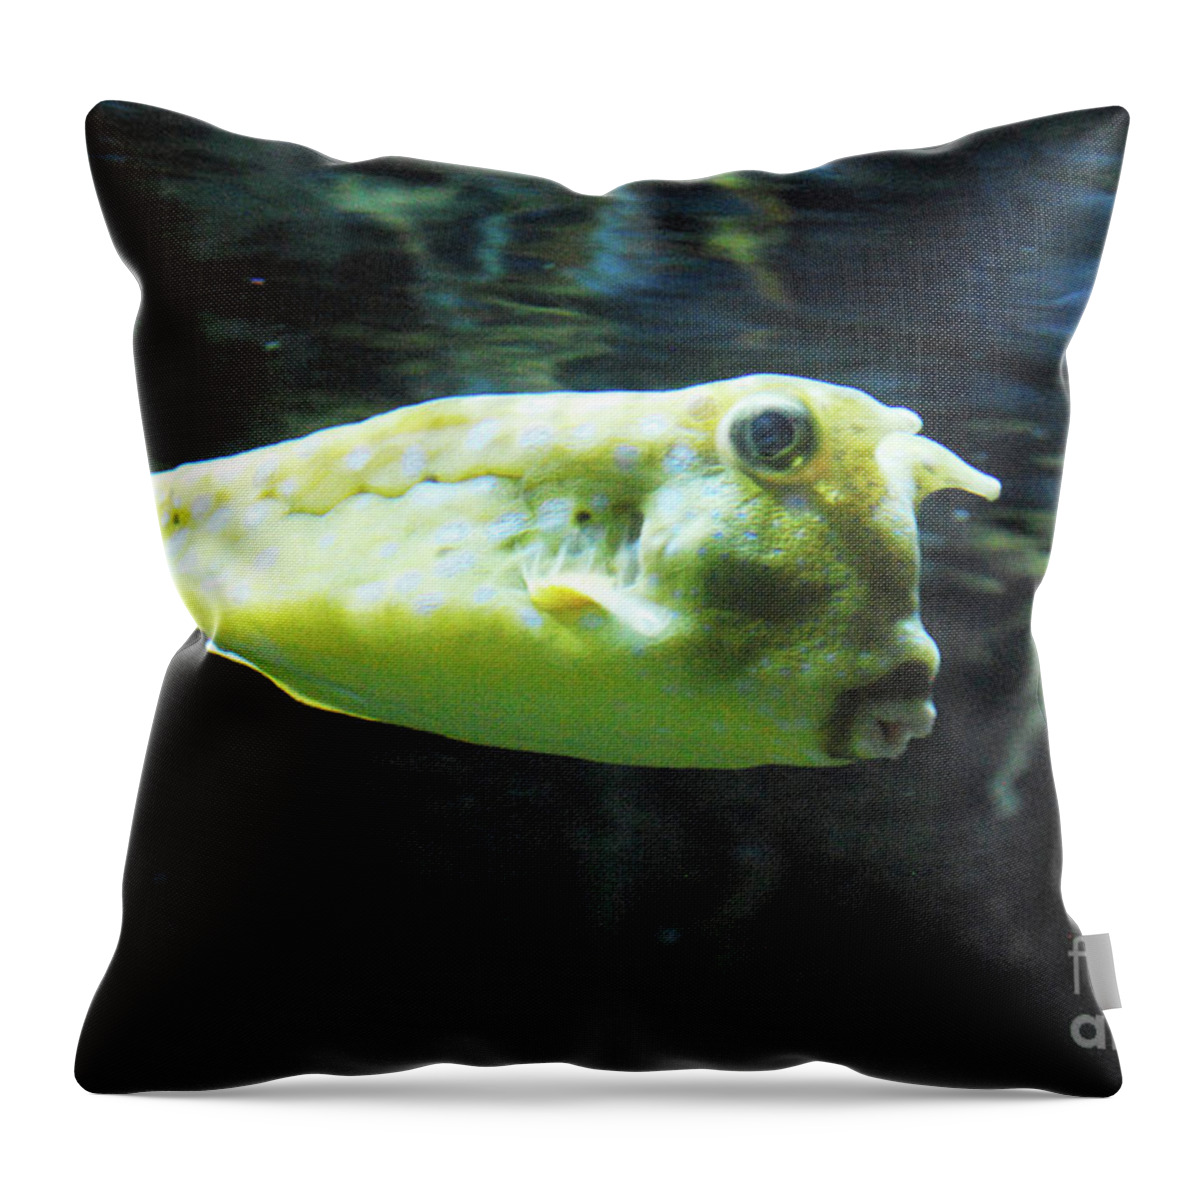 Longhorn-cowfish Throw Pillow featuring the photograph Great Longhorn Cowfish Swimming Along Underwater by DejaVu Designs